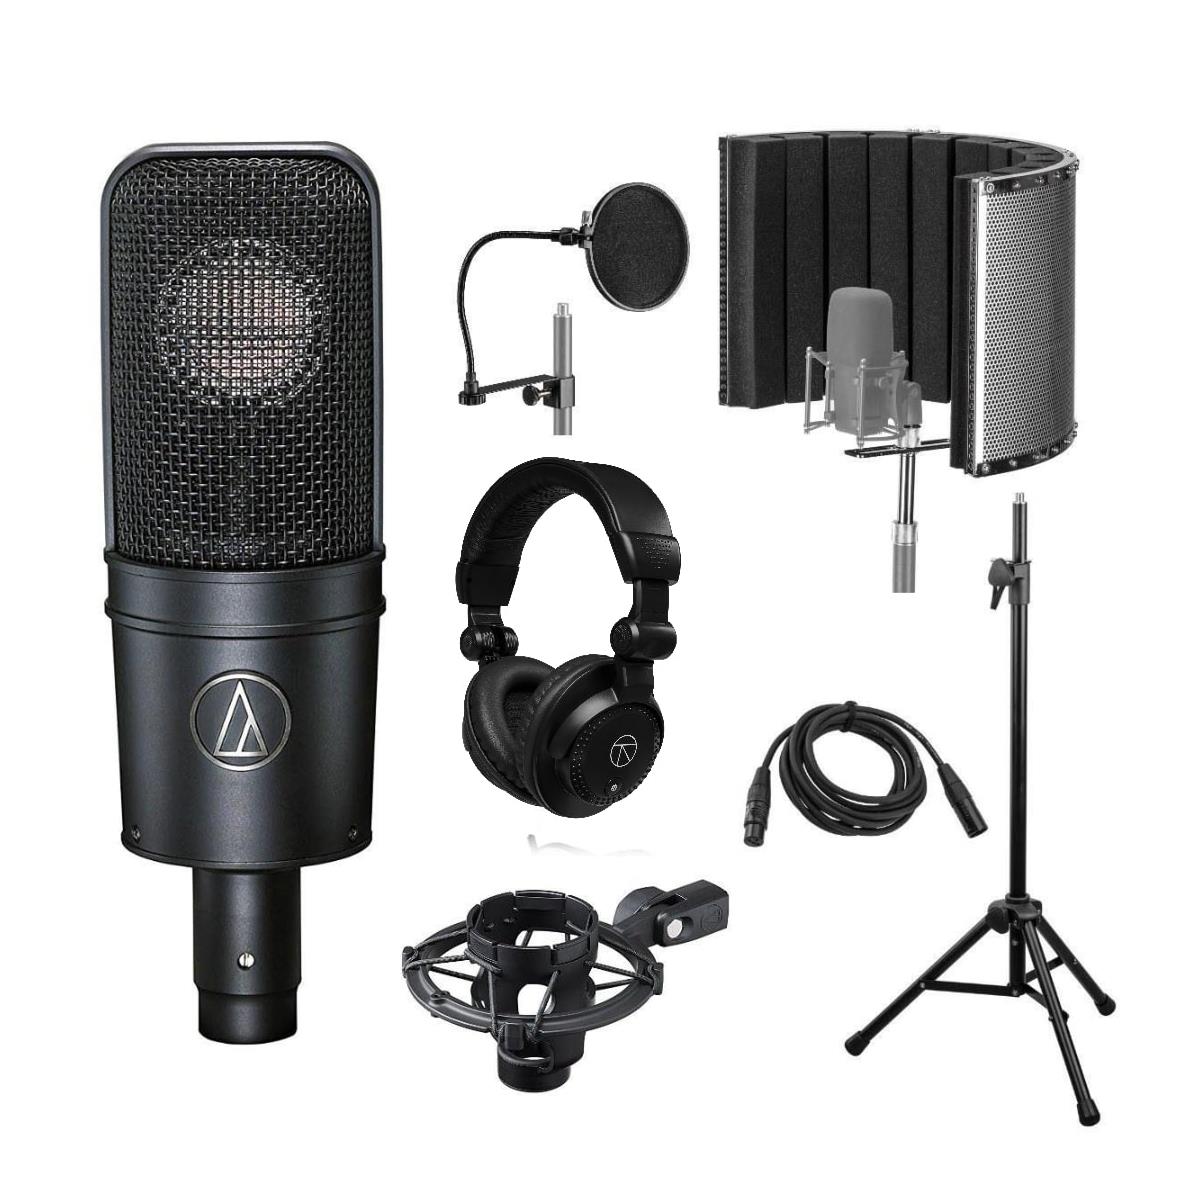 Image of Audio-Technica AT4040 Side-Address Microphone with Vocal Recording Setup Kit